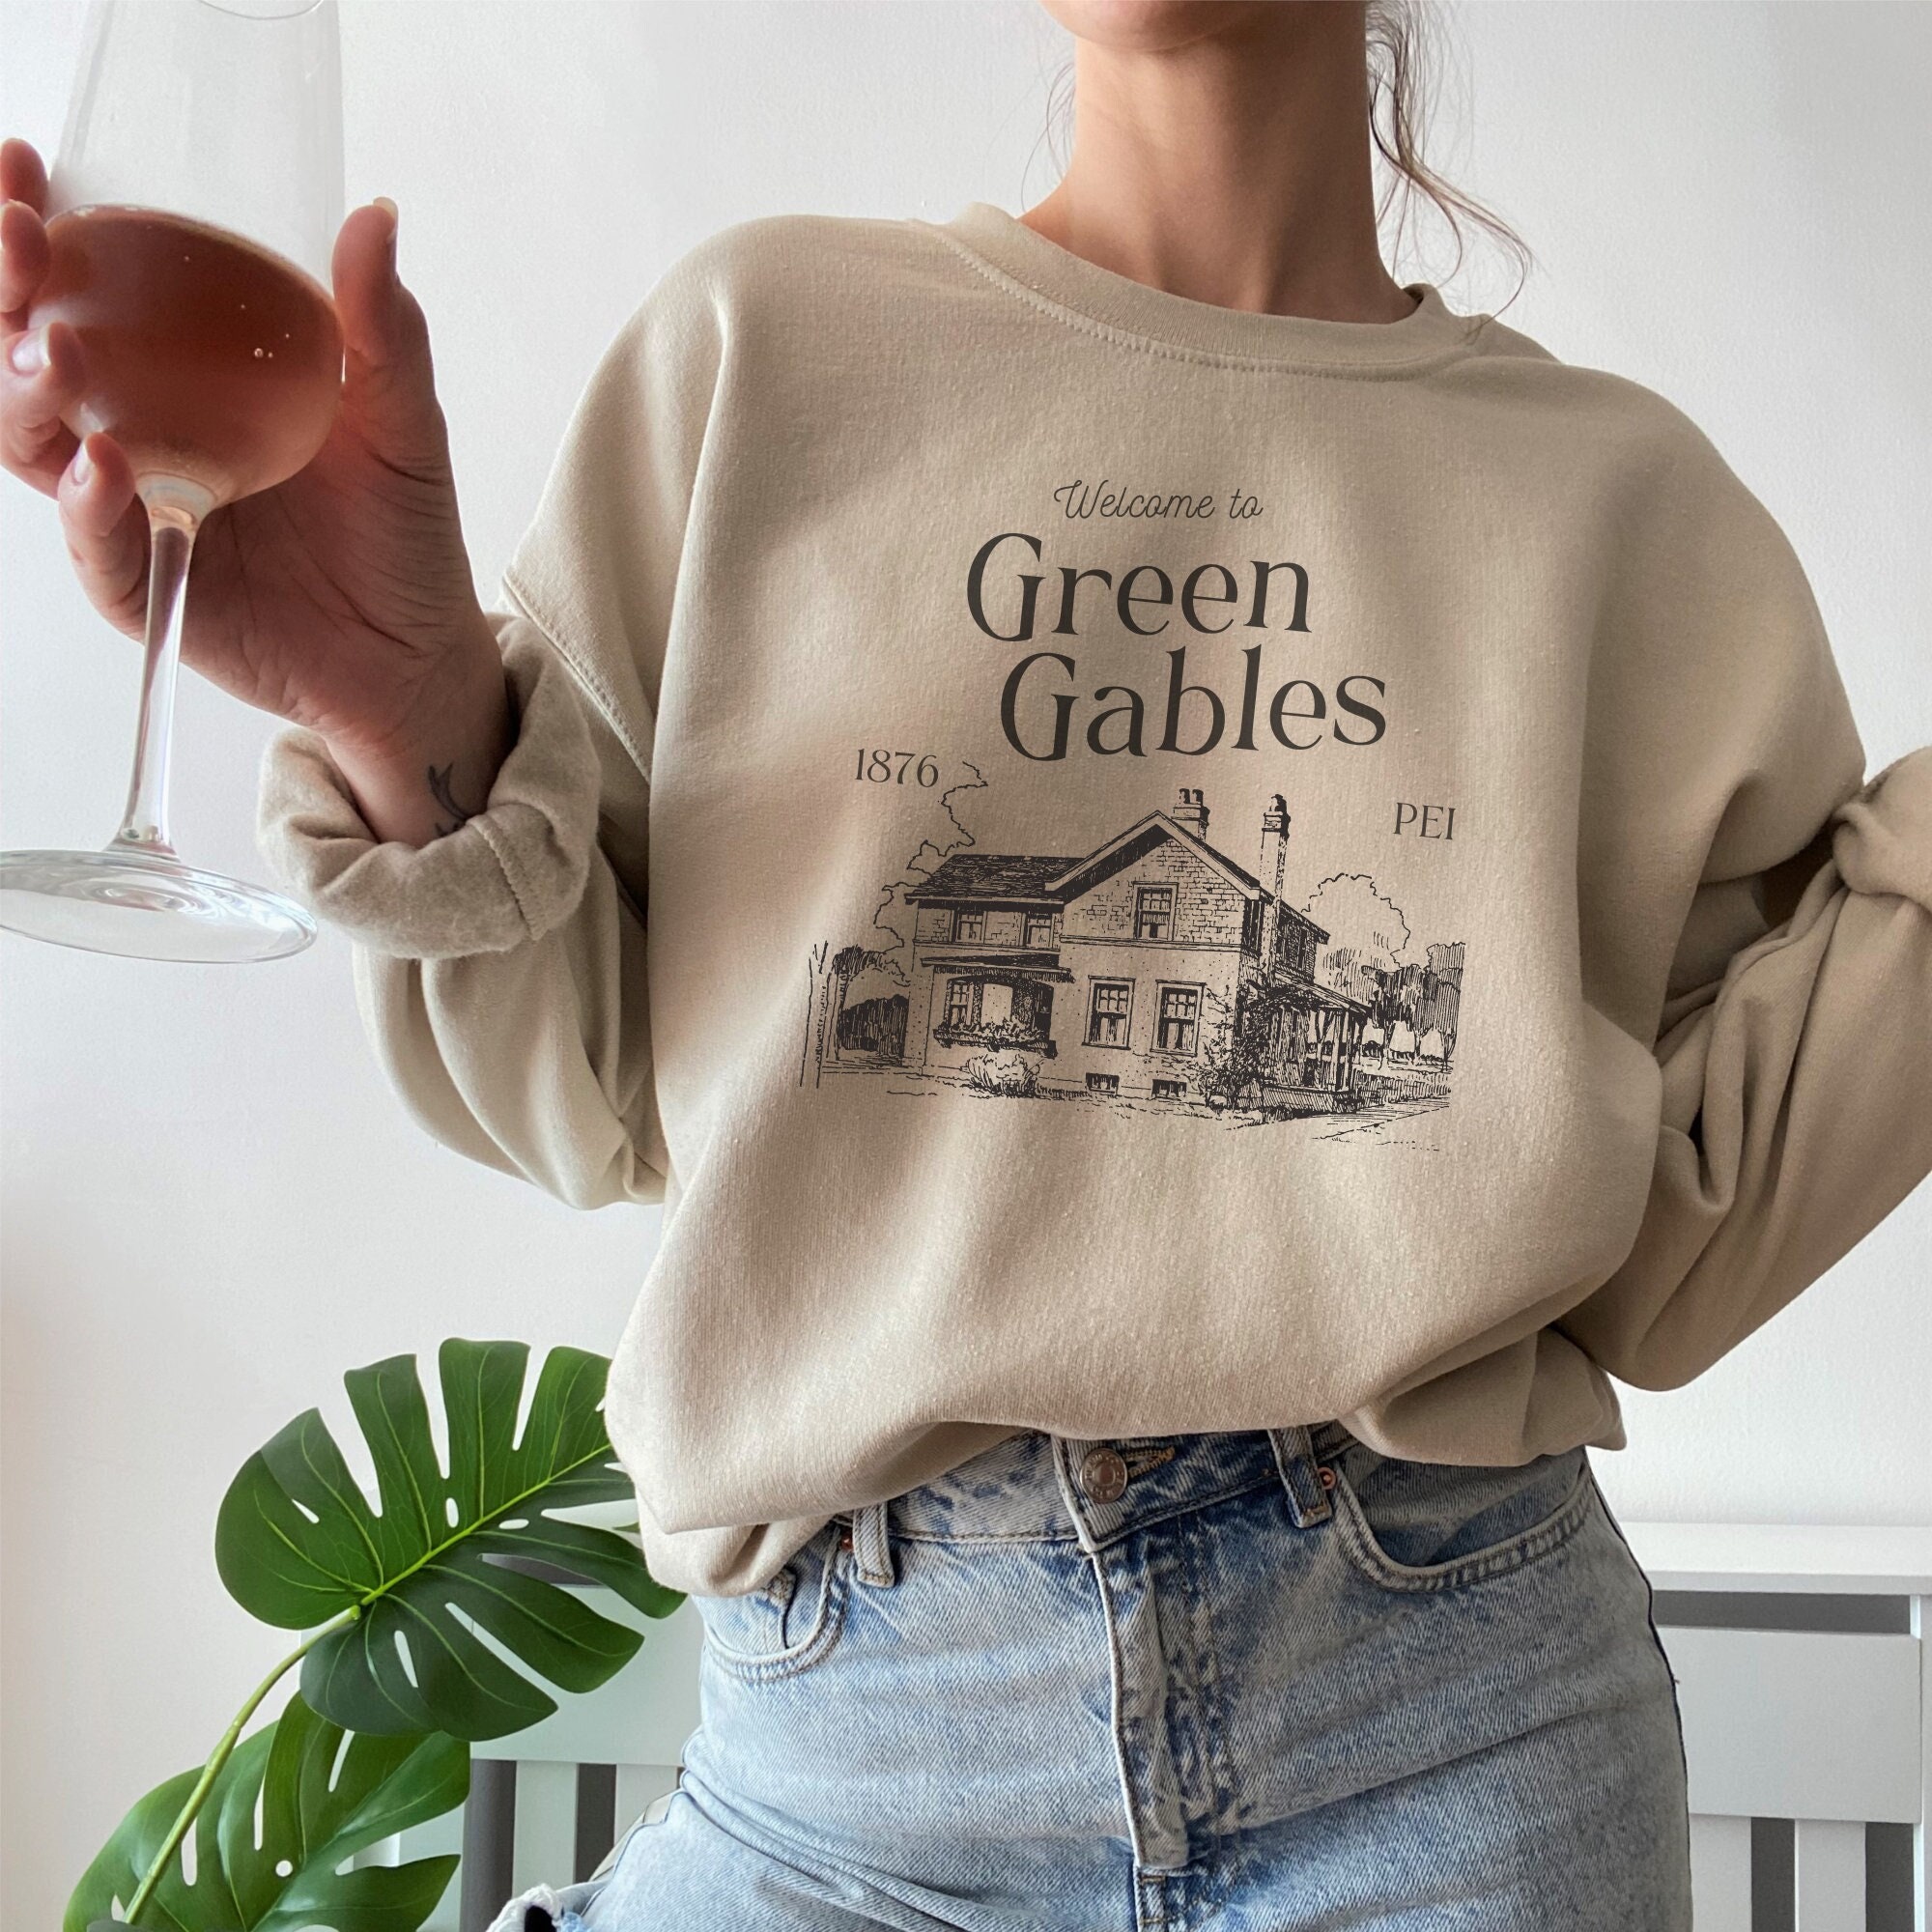 Anne of Green Gables Shirt Welcome to Green Gables - Etsy